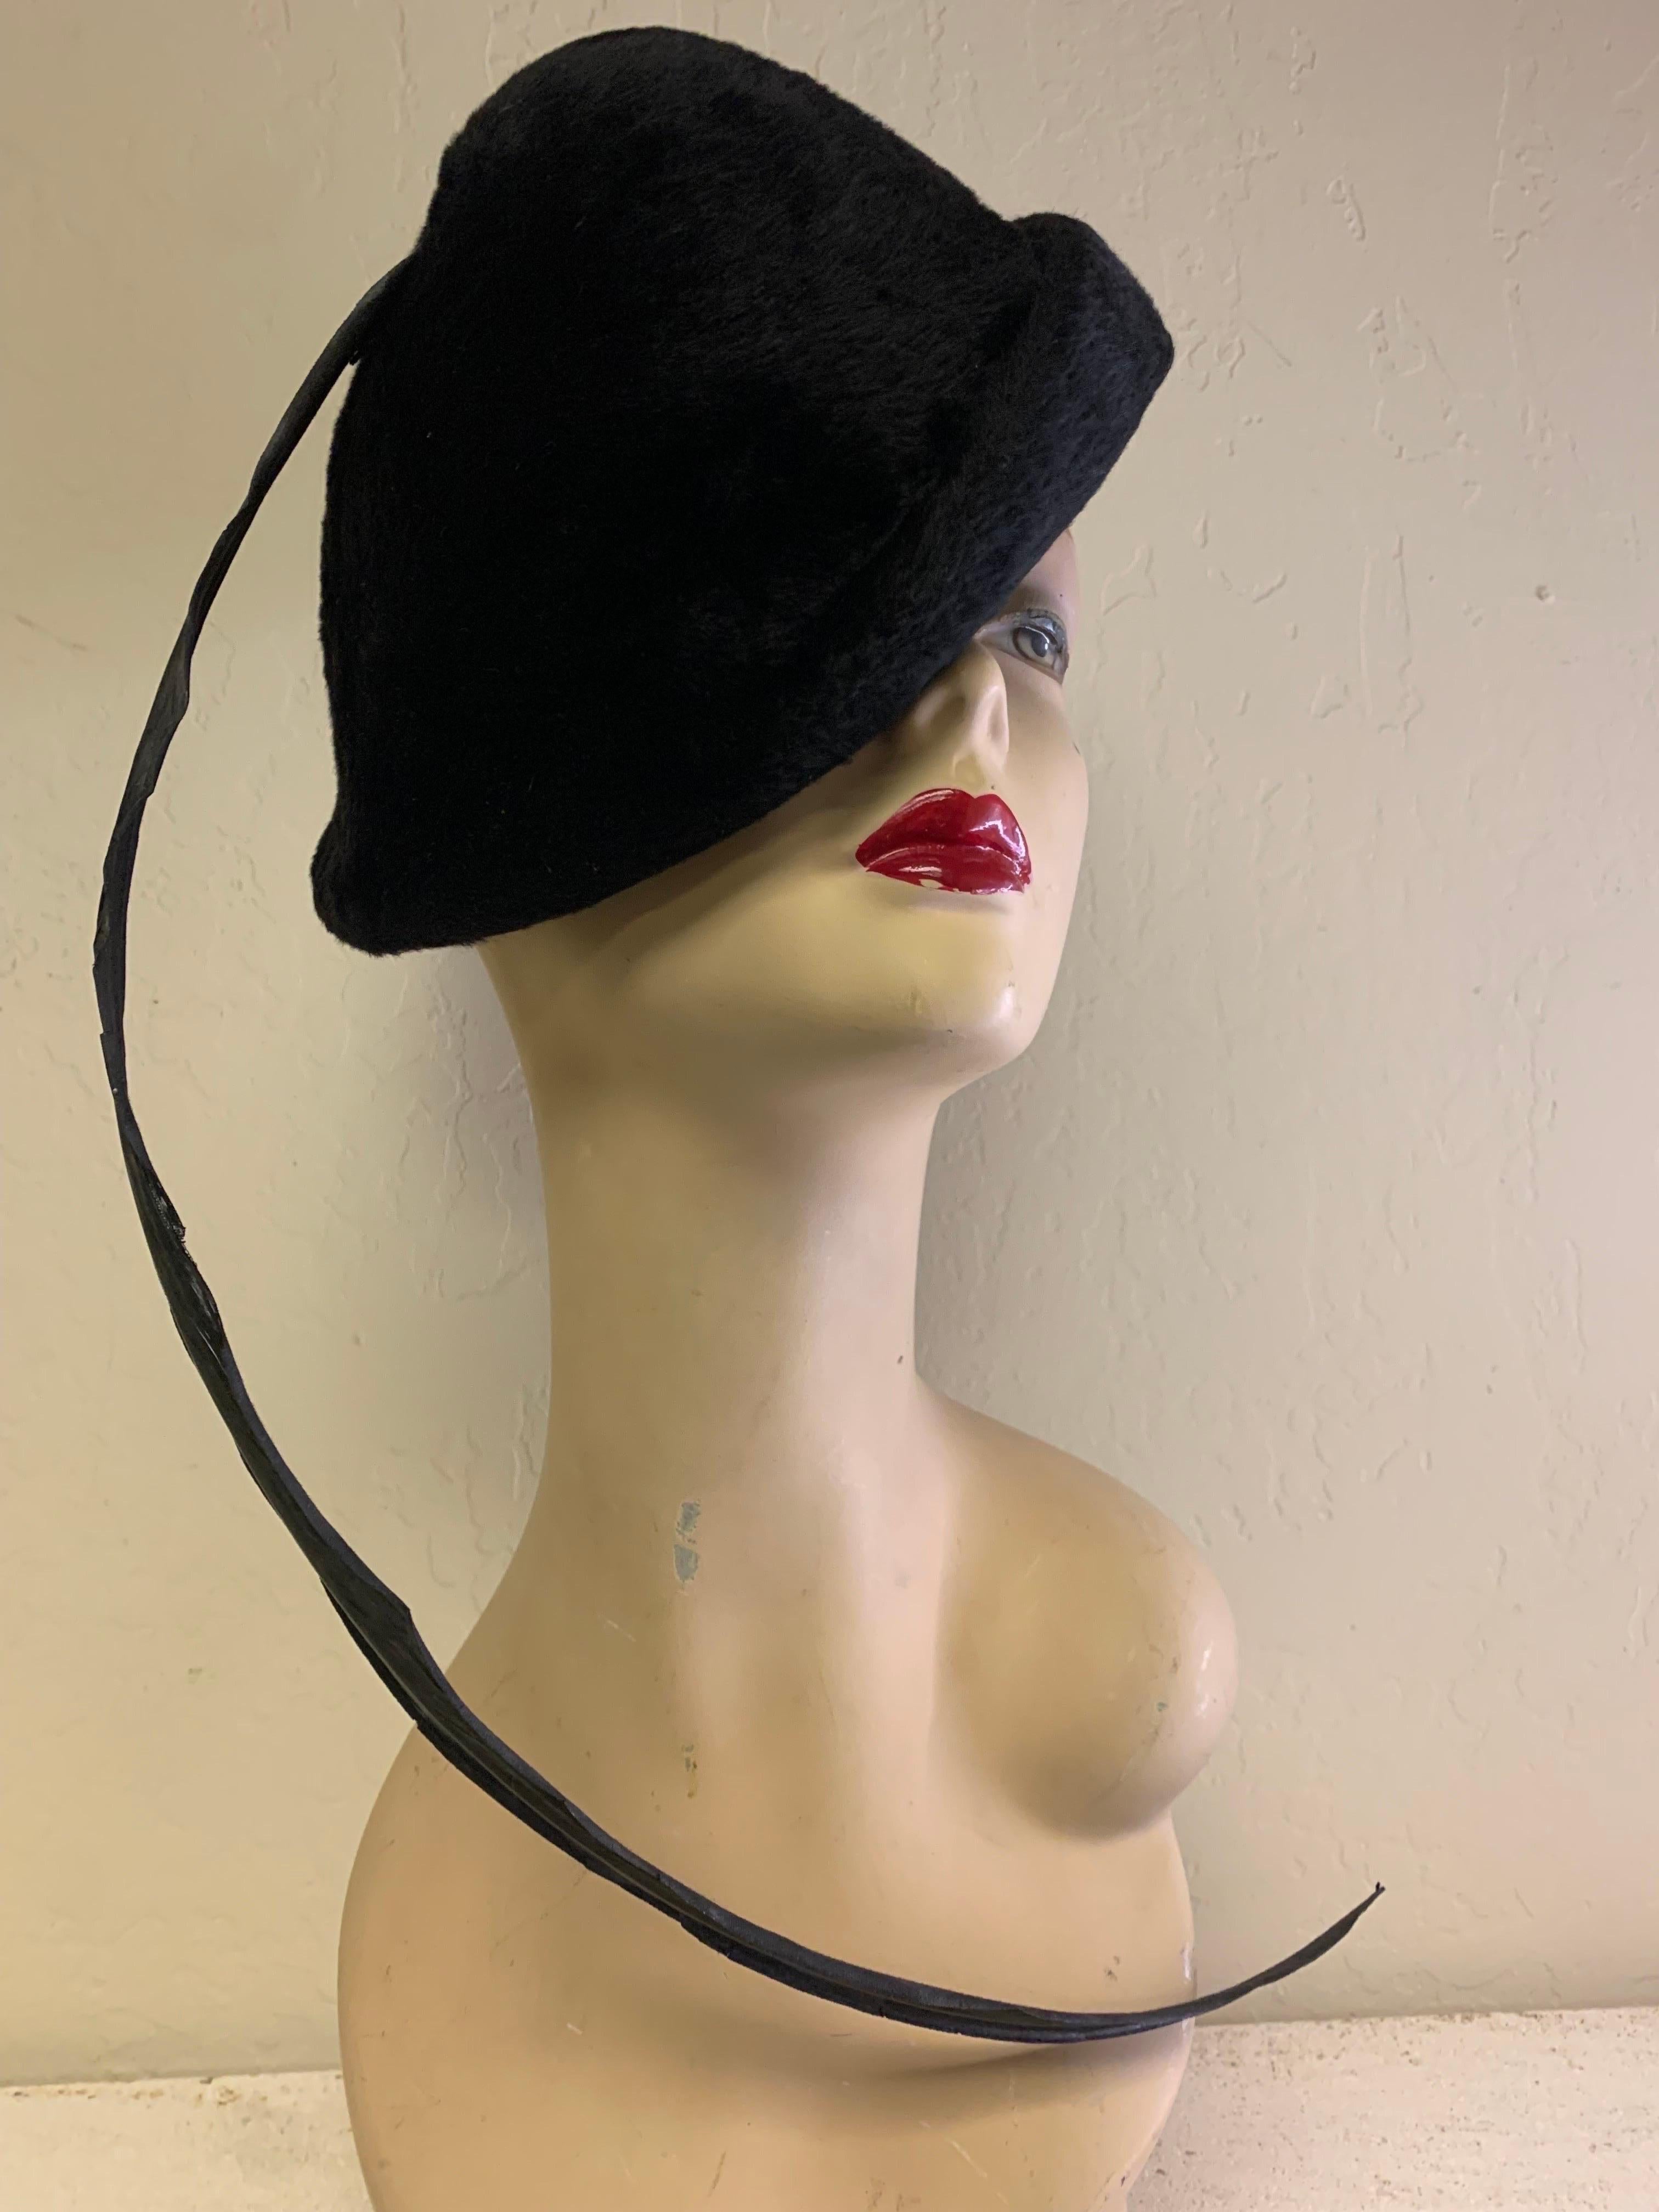 Early 1970s rare Yves Saint Laurent plush fine wool high-crown hat, molded shape with rolled soft edge and one singular extra-long stiffly lacquered pheasant feather. Fits M-L crown.